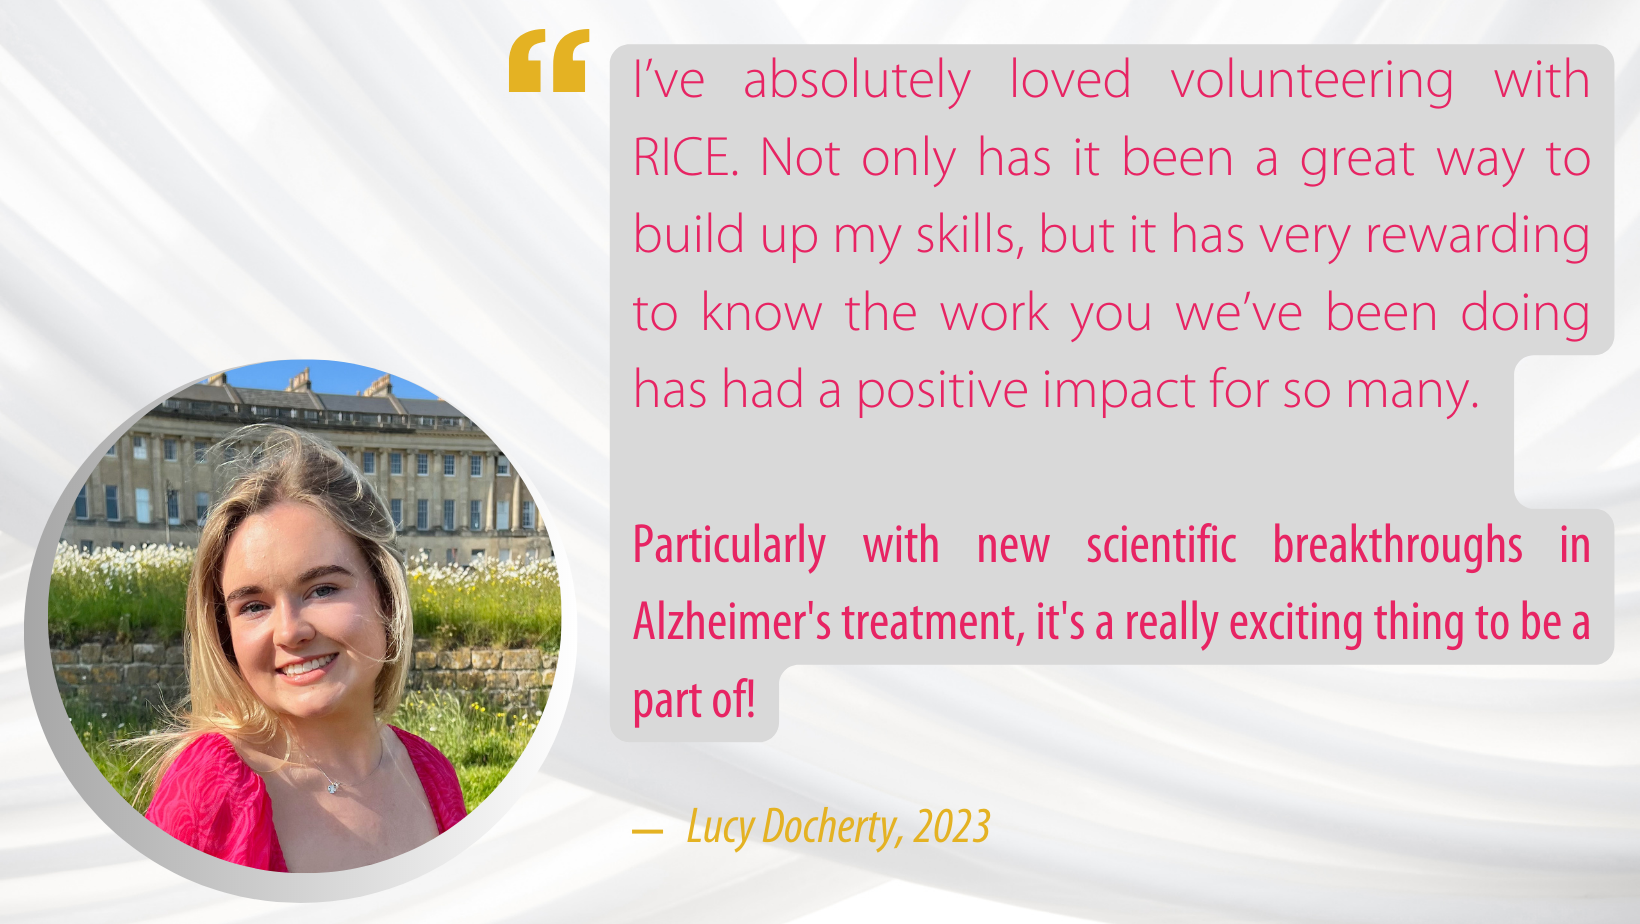 Quote from a volunteer in 2023: 
"I’ve absolutely loved volunteering with RICE. Not only has it been a great way to build up my skills, but it has very rewarding to know the work you we’ve been doing has had a positive impact for so many. Particularly with new scientific breakthroughs in Alzheimers treatment, it's a really exciting thing to be a part of!”
